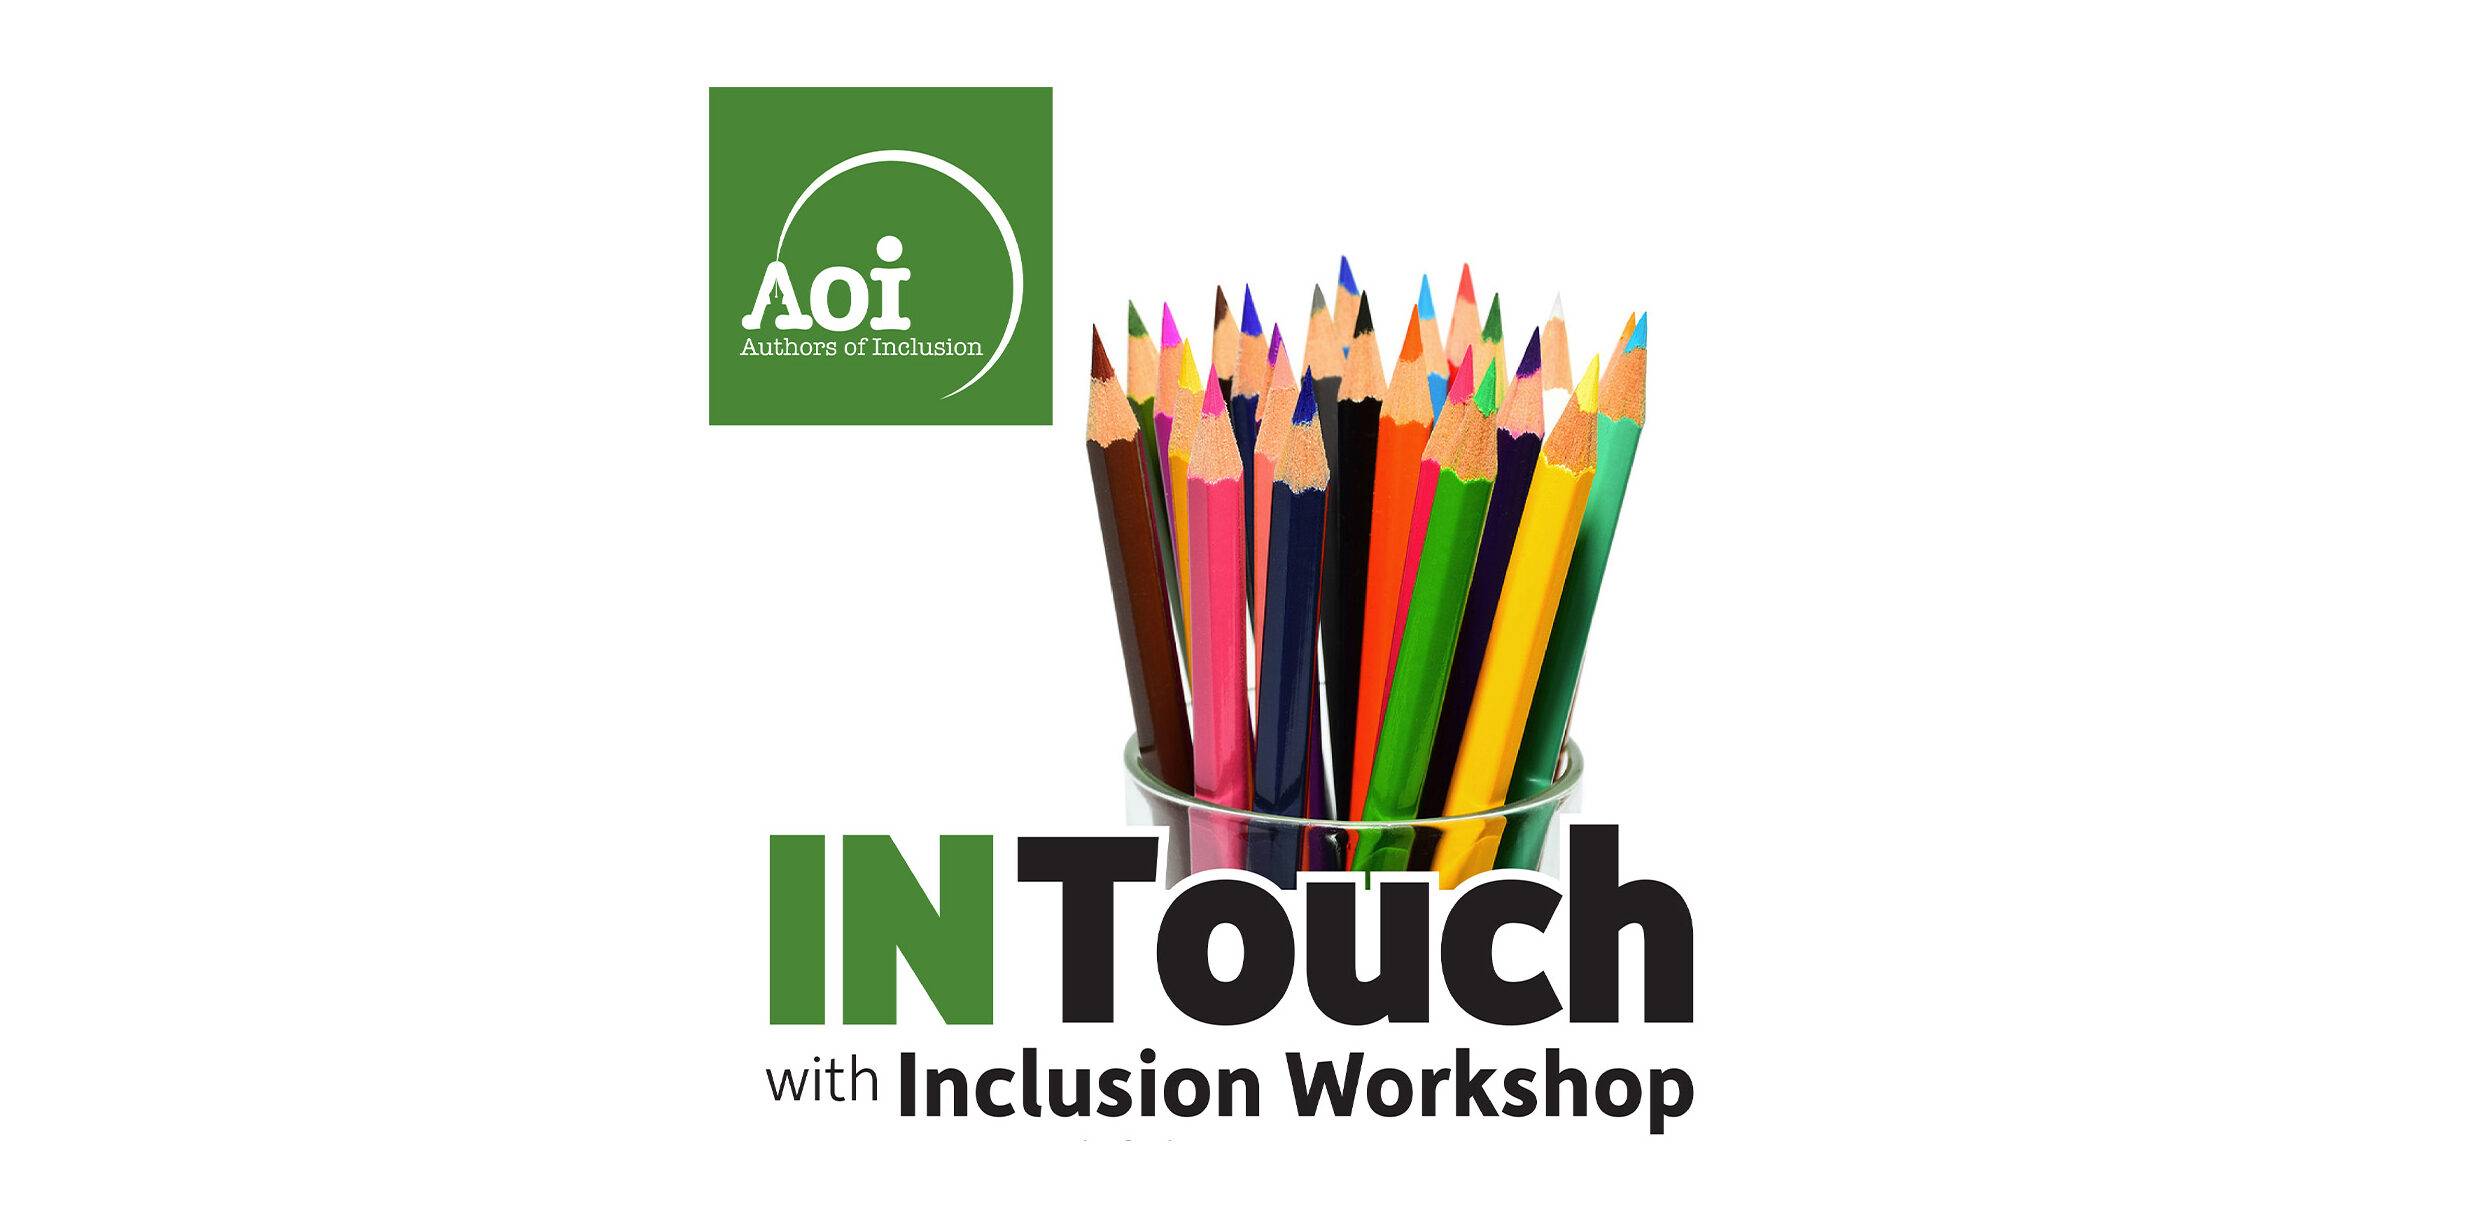 Intouch Inclusion Workshop offered by Authors of Inclusion